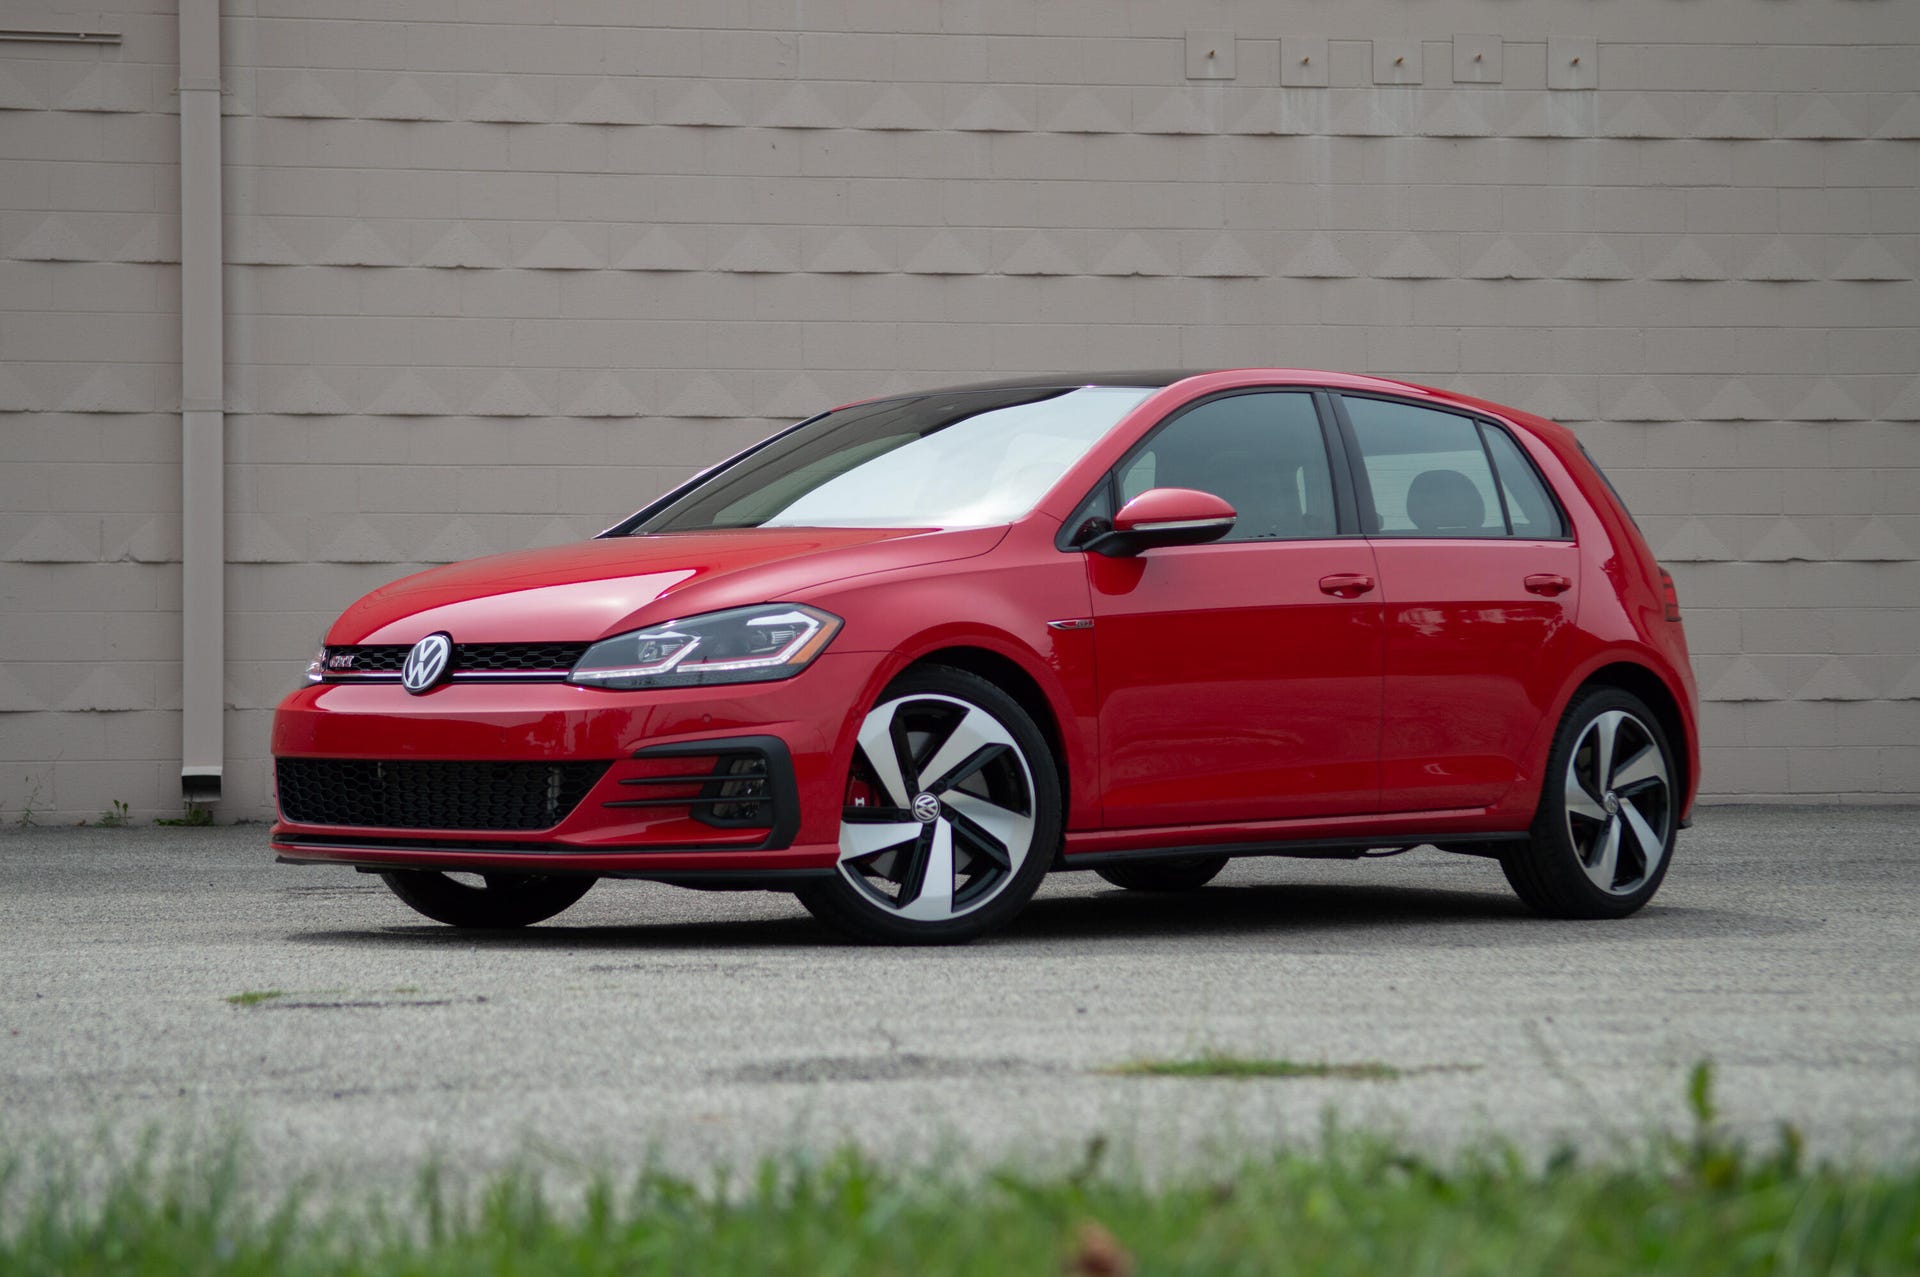 2019 Volkswagen Golf GTI review: The best daily driver gets better - CNET